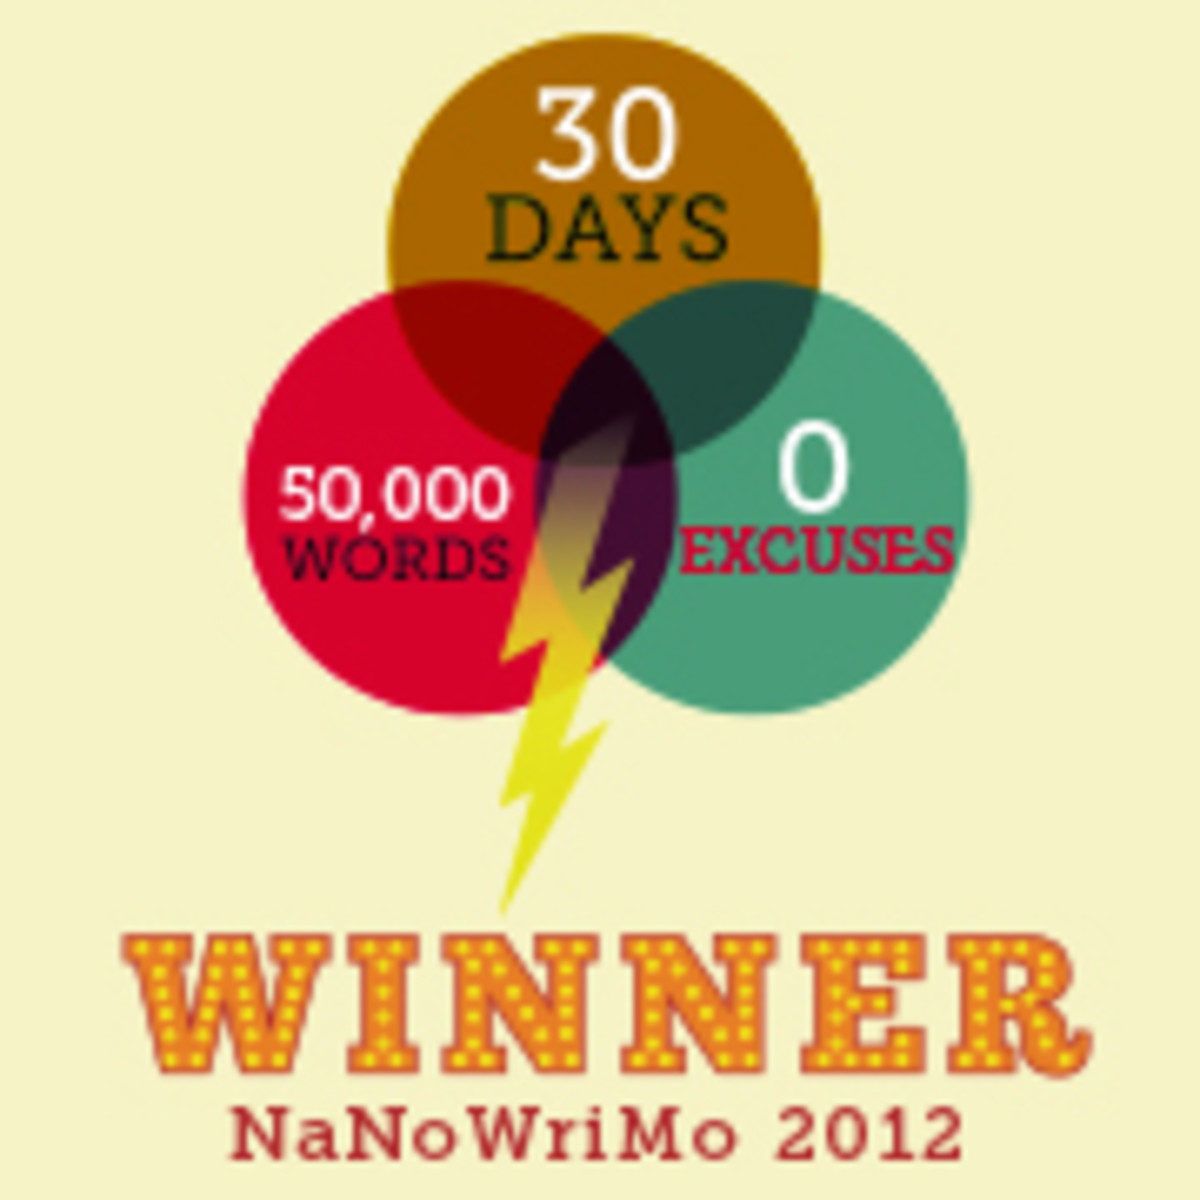 After validating your novel, you can put this badge on your website.